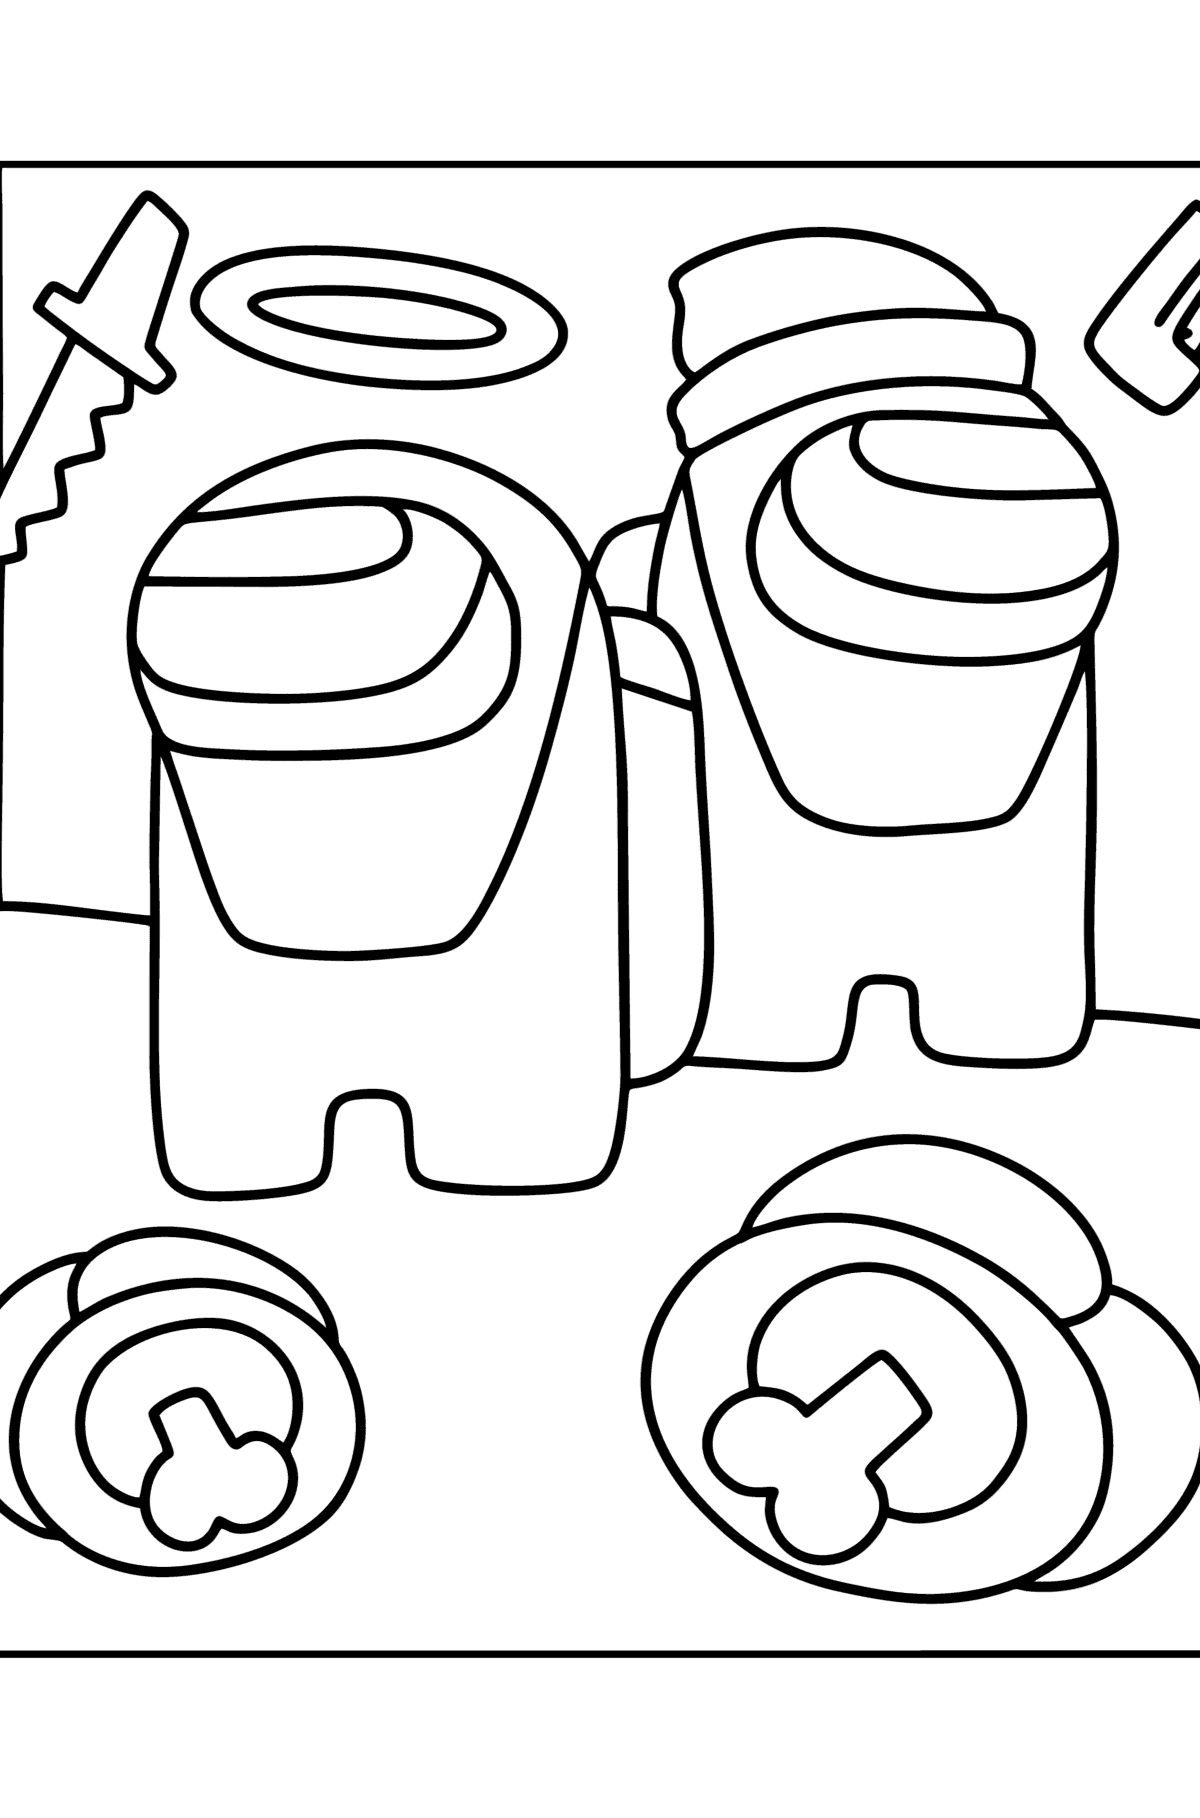 Coloring page Among As Pursuit - Coloring Pages for Kids